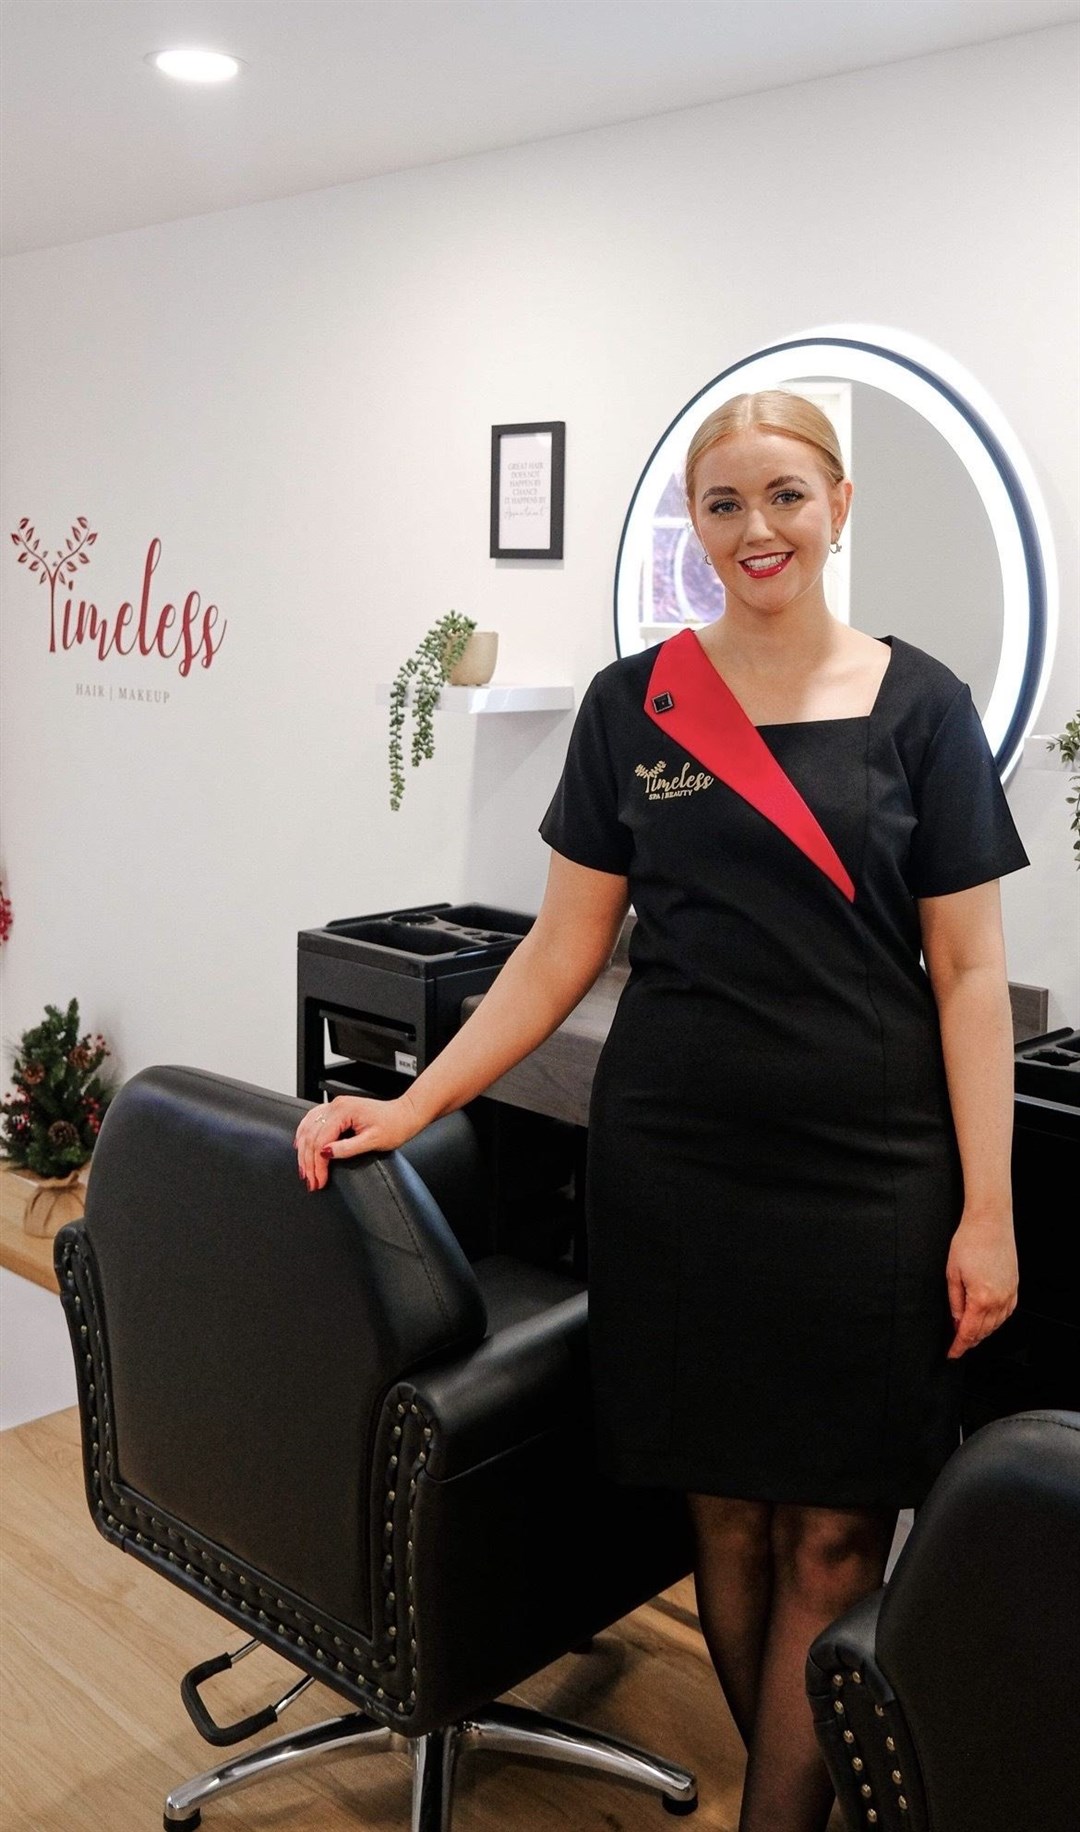 Caoimhe at Timeless salon will give mums some much-deserved pampering.